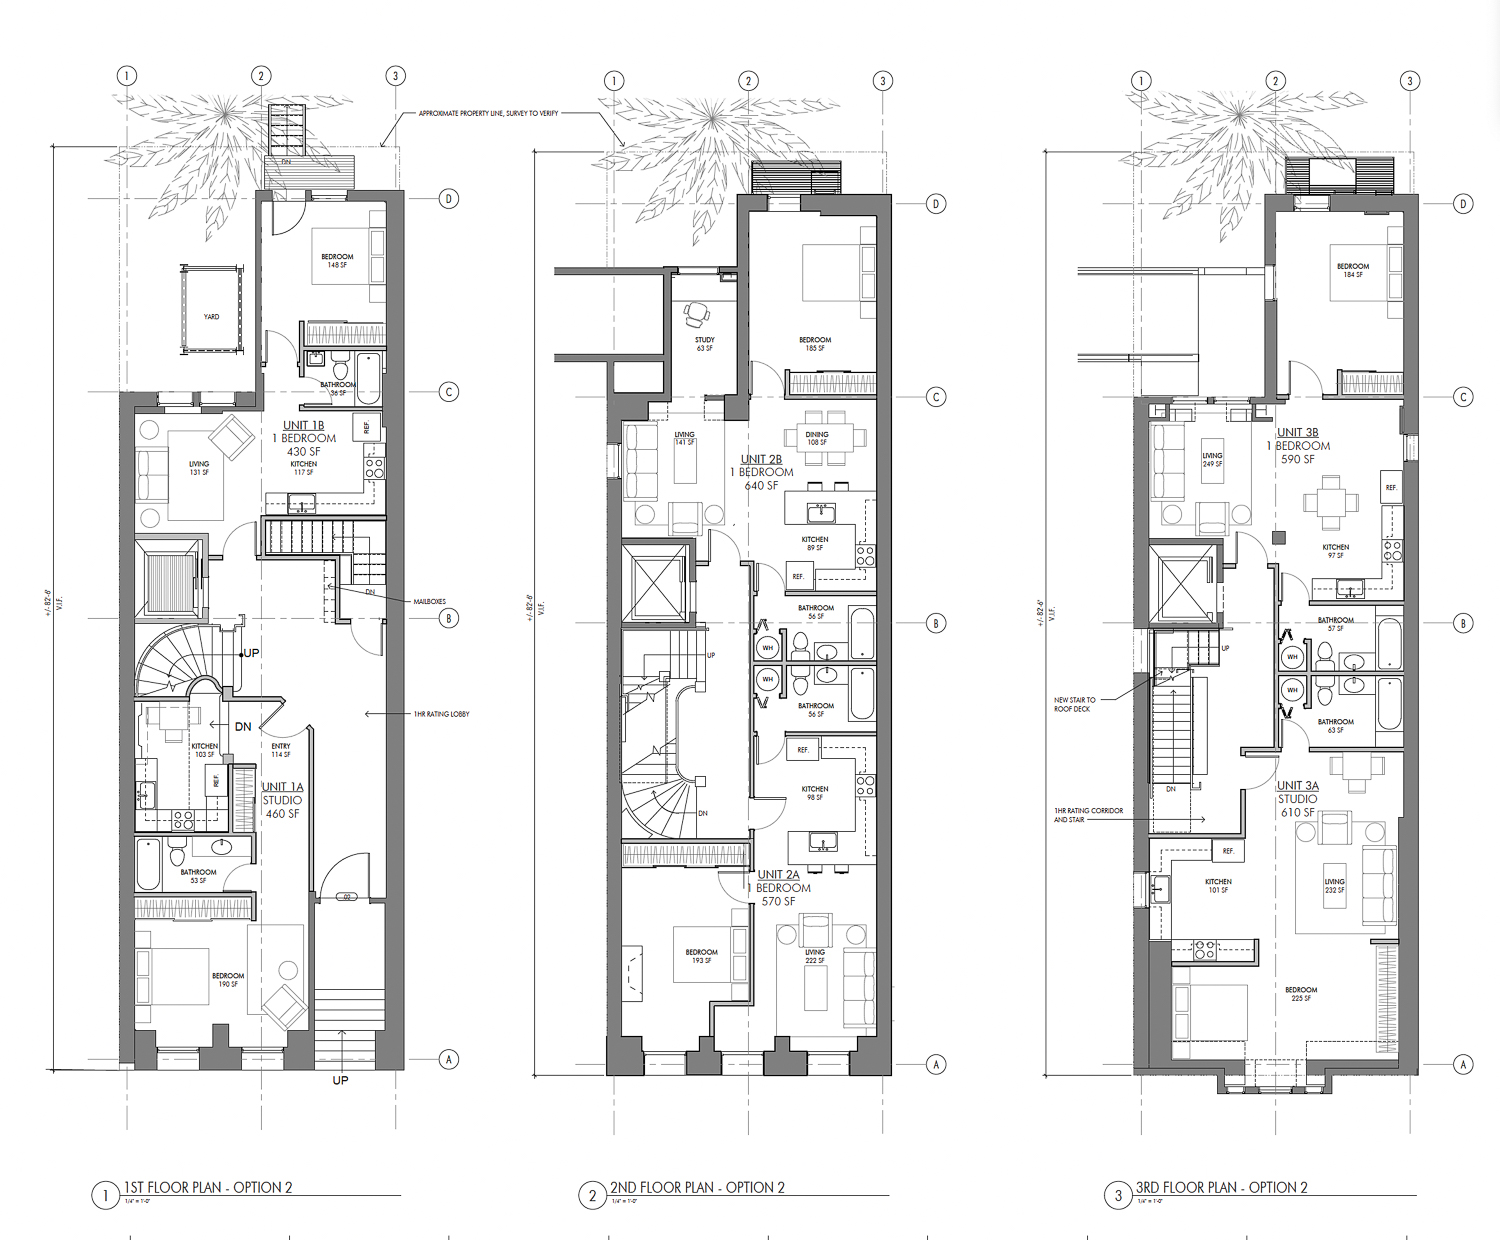 535 Powell Street floor plans, illustration by dsk Architects